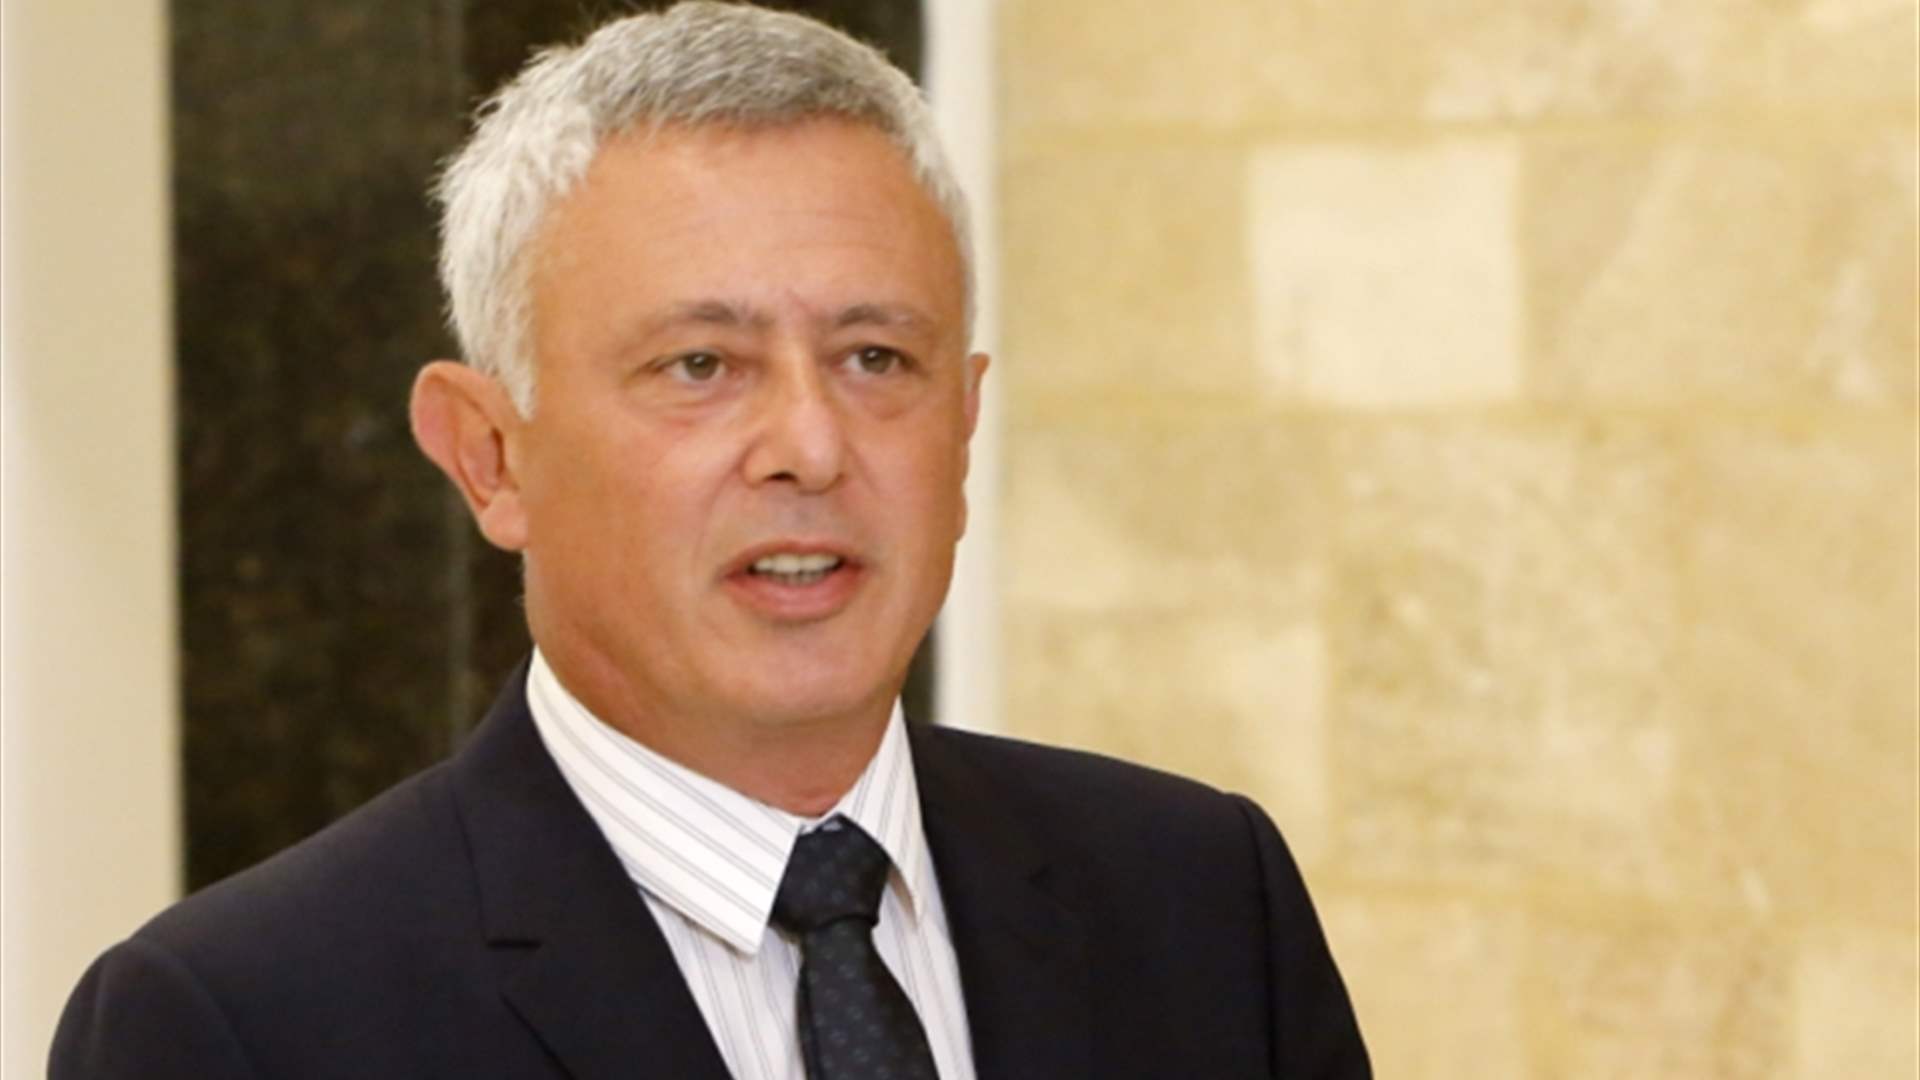 Paris to Frangieh: Debate over your nomination still ongoing 